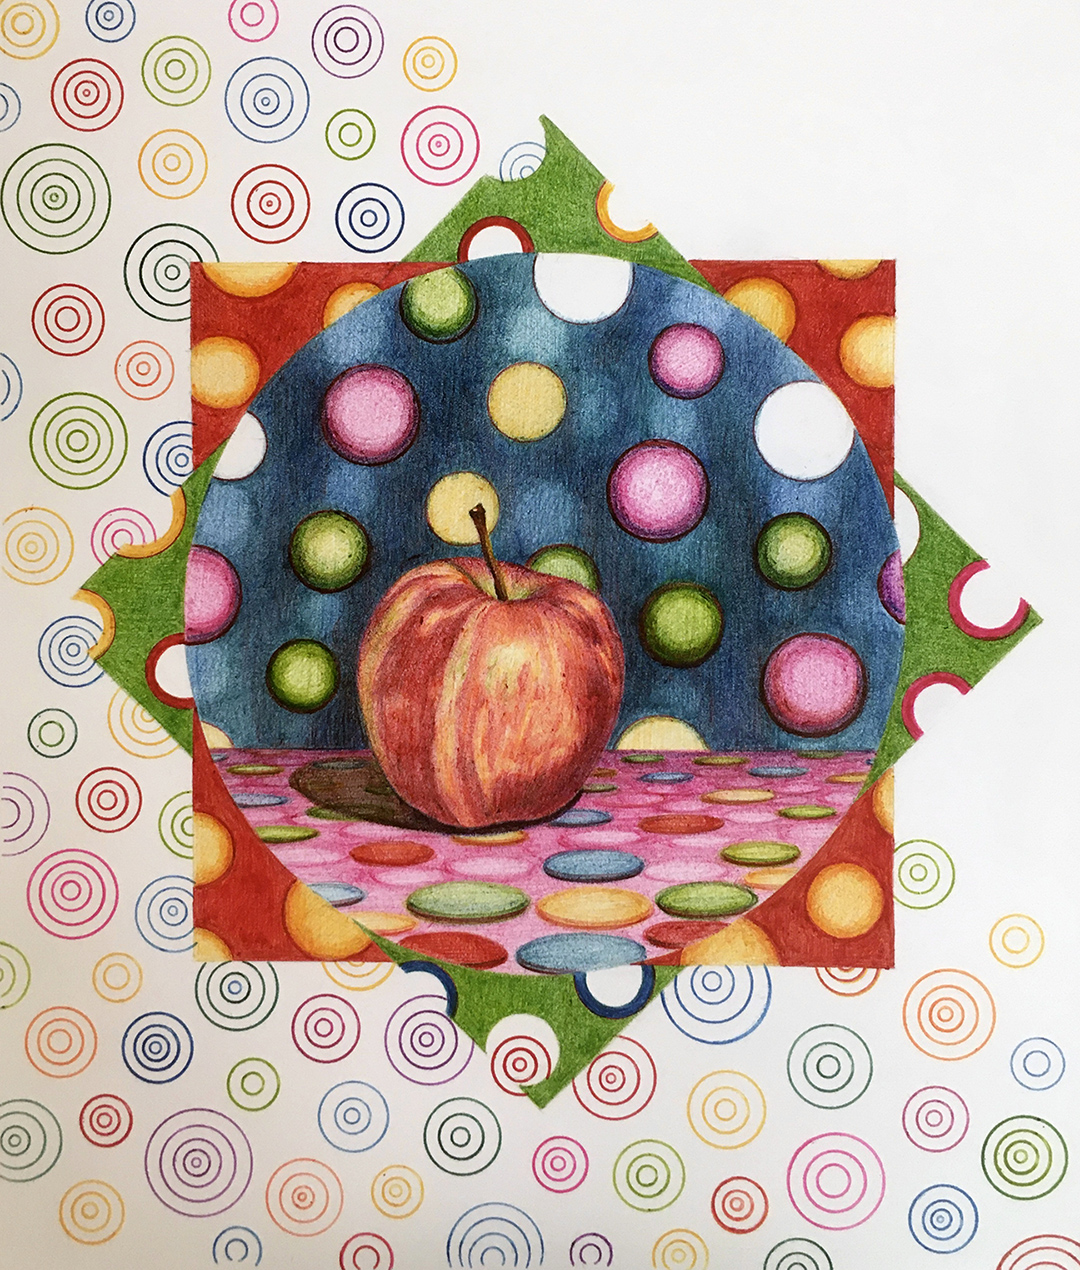 Color pen drawing of a red apple.